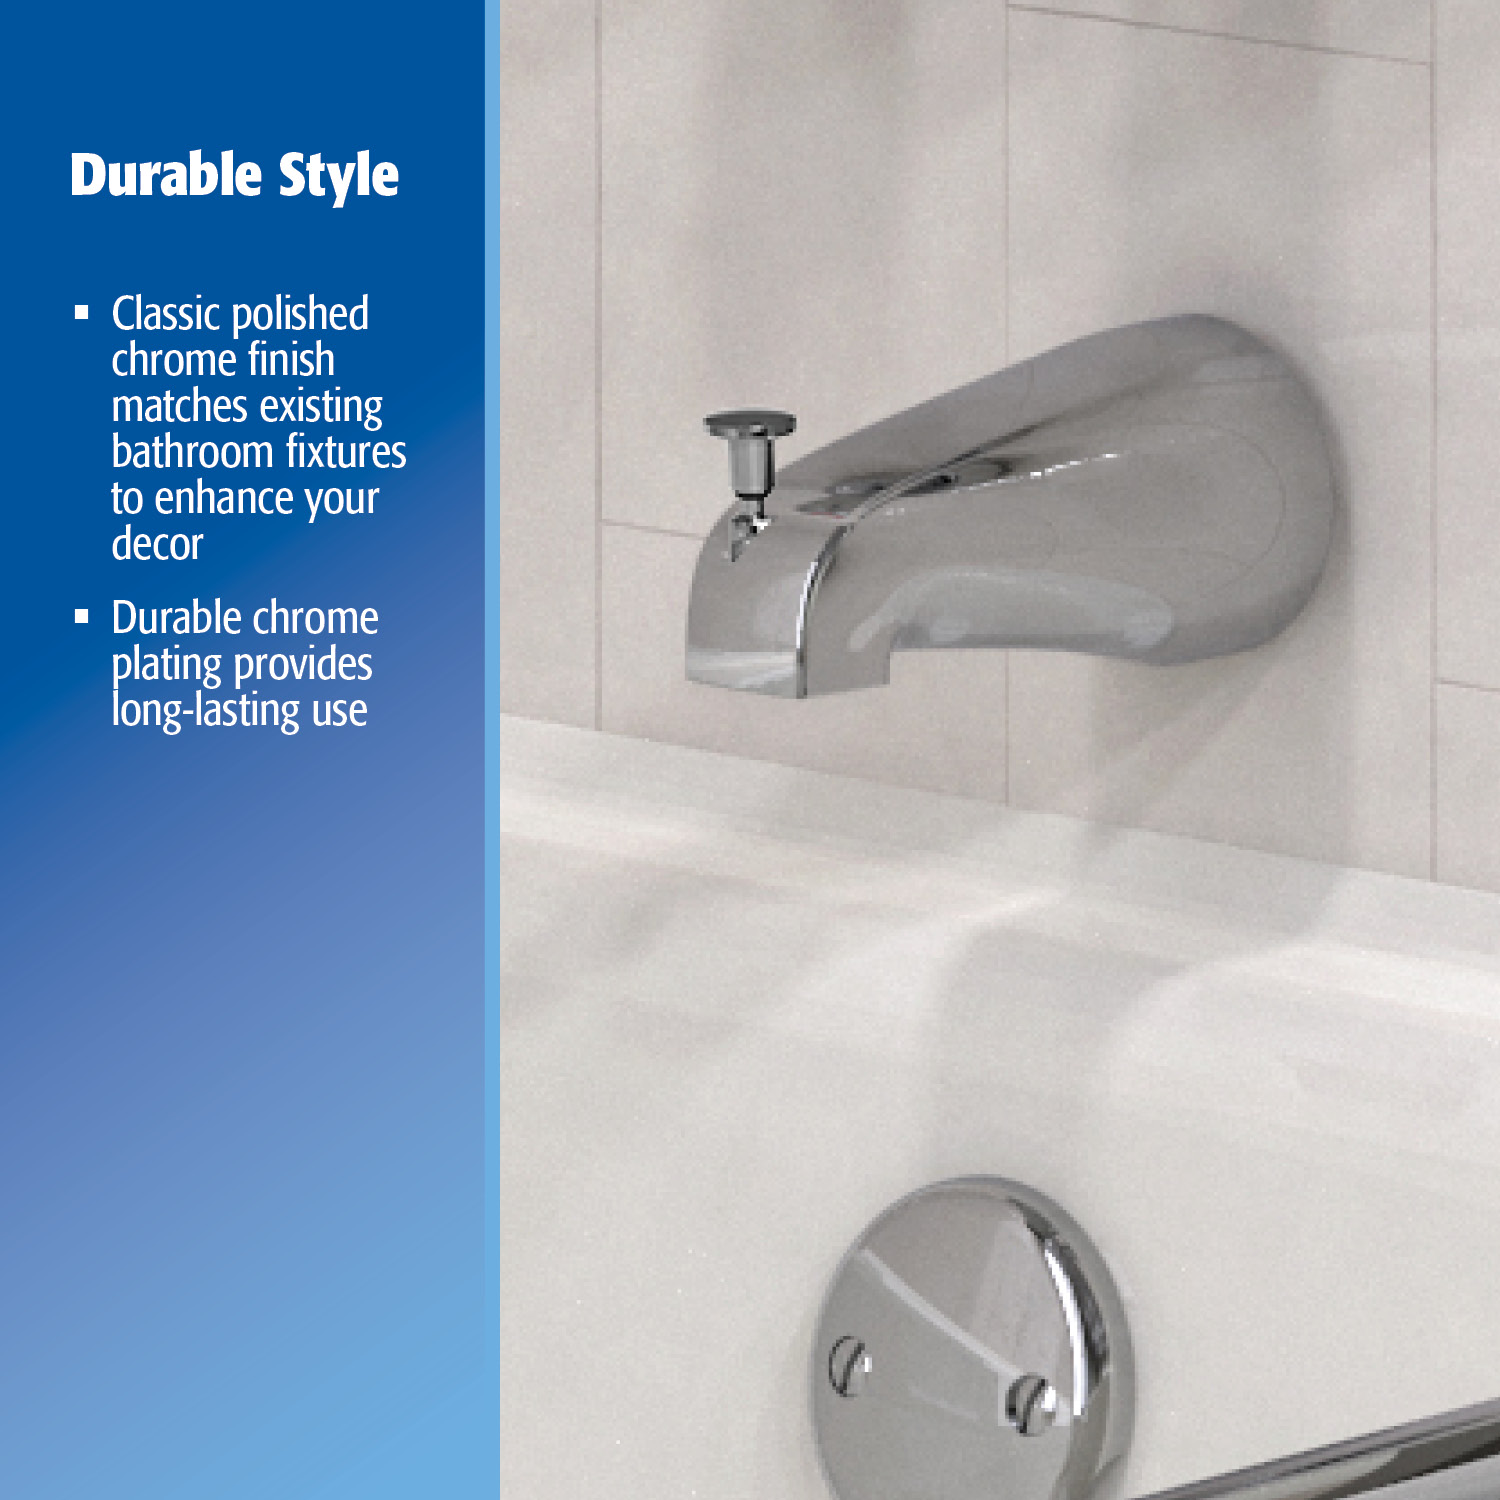 Keeney PP825-35 Universal Tub Spout with Front Diverter, Polished Chrome - image 3 of 9